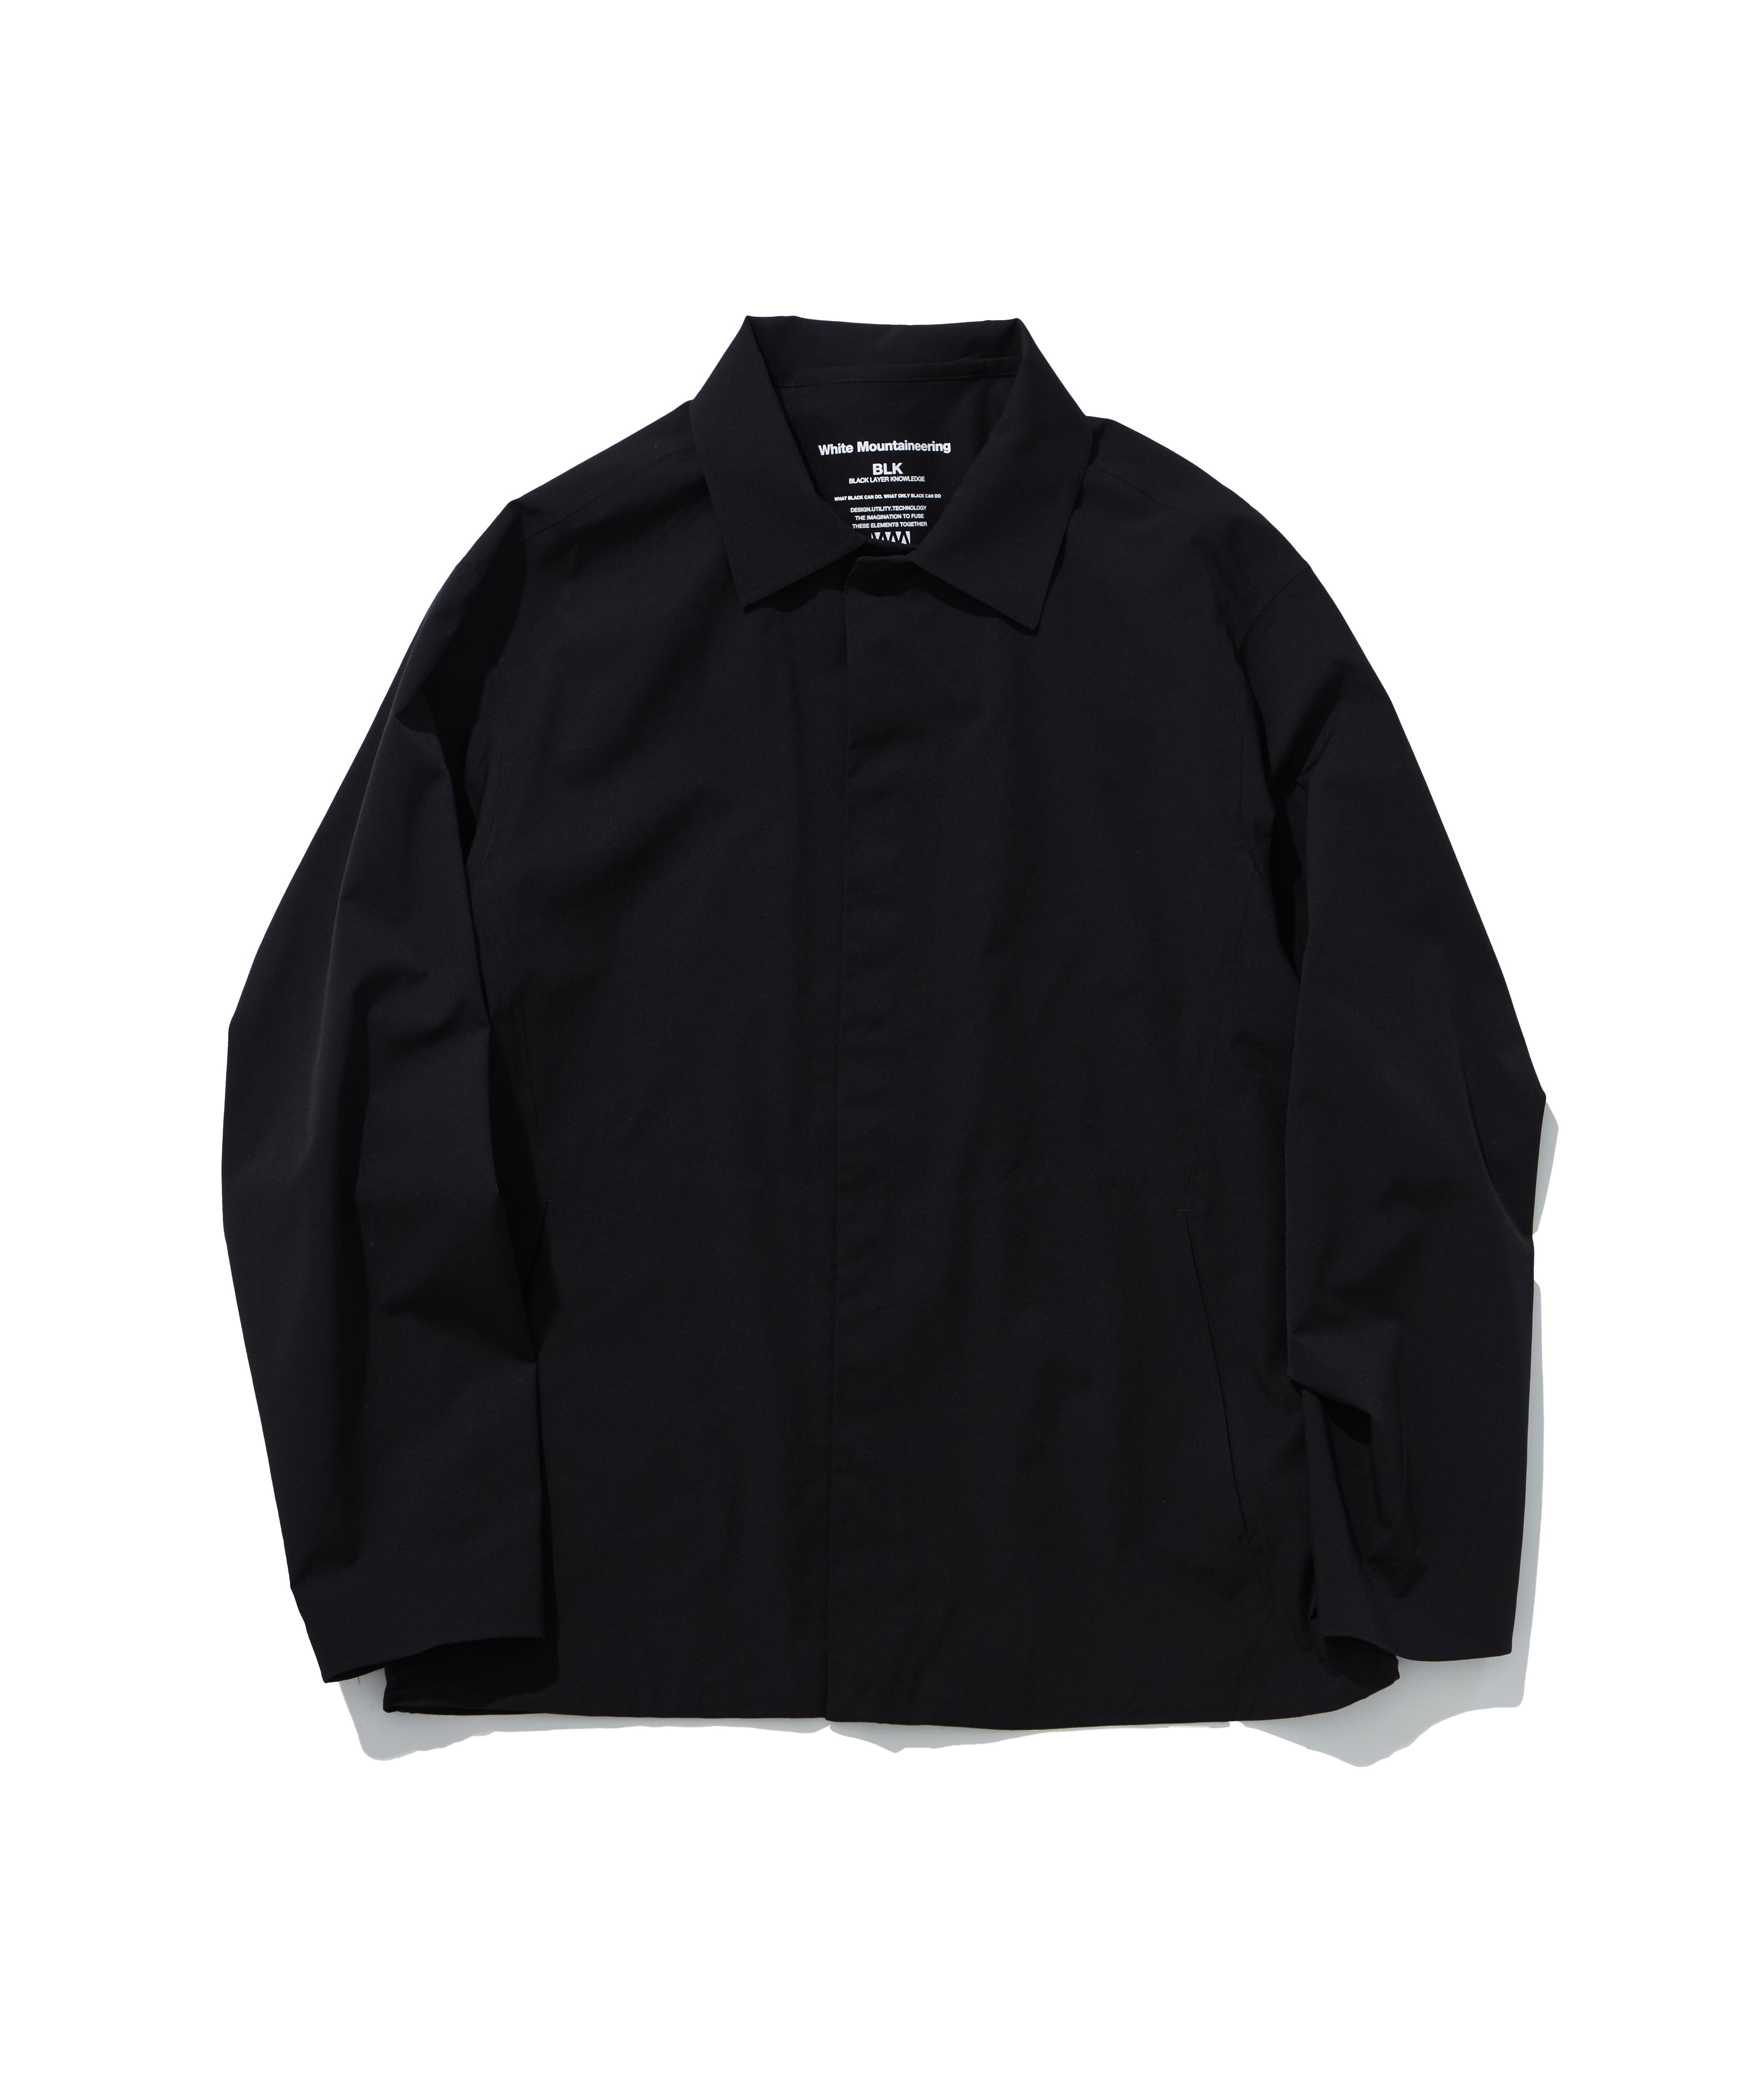 BLK WHITE MOUNTAINEERING COACH JACKET数回着用の美品です - ブルゾン